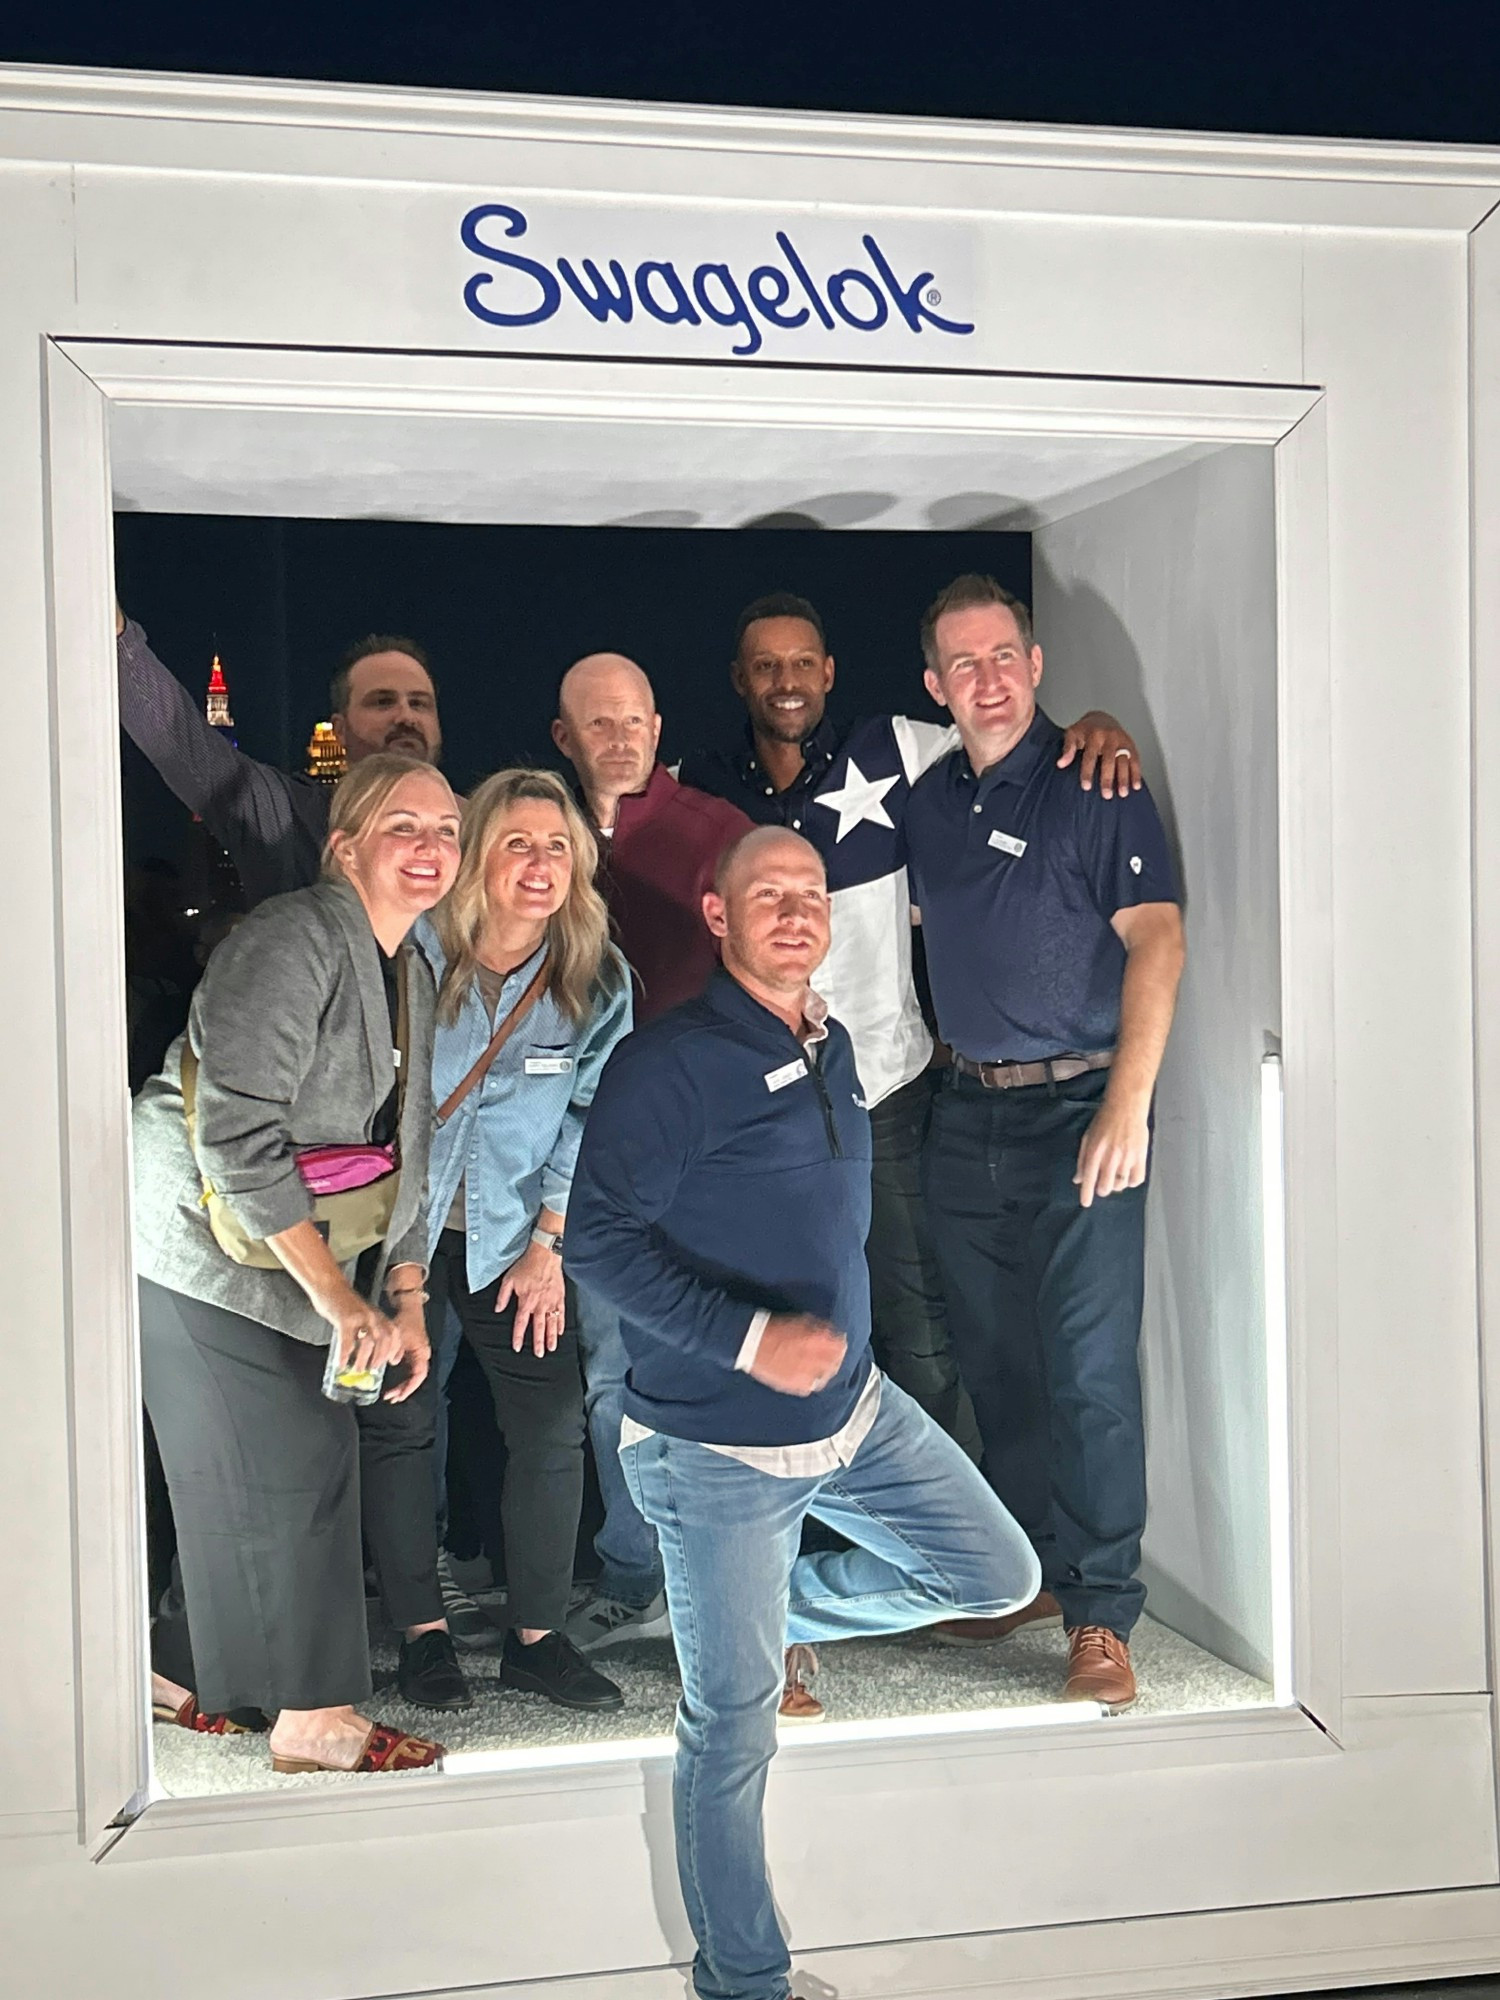 Leadership Conference at the Swagelok Corporate in Ohio.